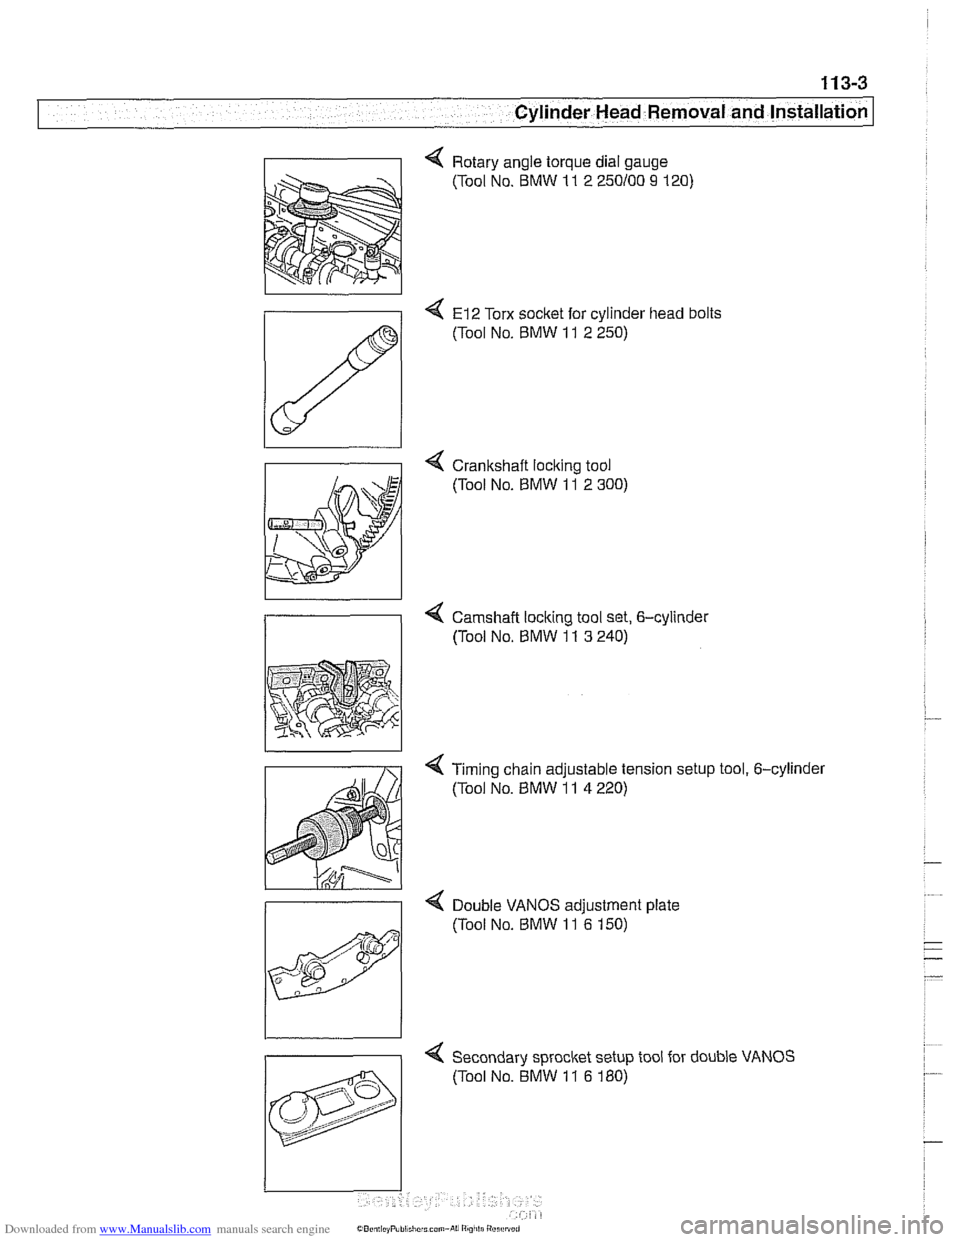 BMW 525i 2001 E39 Workshop Manual Downloaded from www.Manualslib.com manuals search engine 
11 3-3 
Cylinder Head Removal and Installation 
4 Rotary  angle torque  dial gauge 
(Tool  No. BMW 
11 2 250100 9 120) 
4 El2 Torx  socket  fo